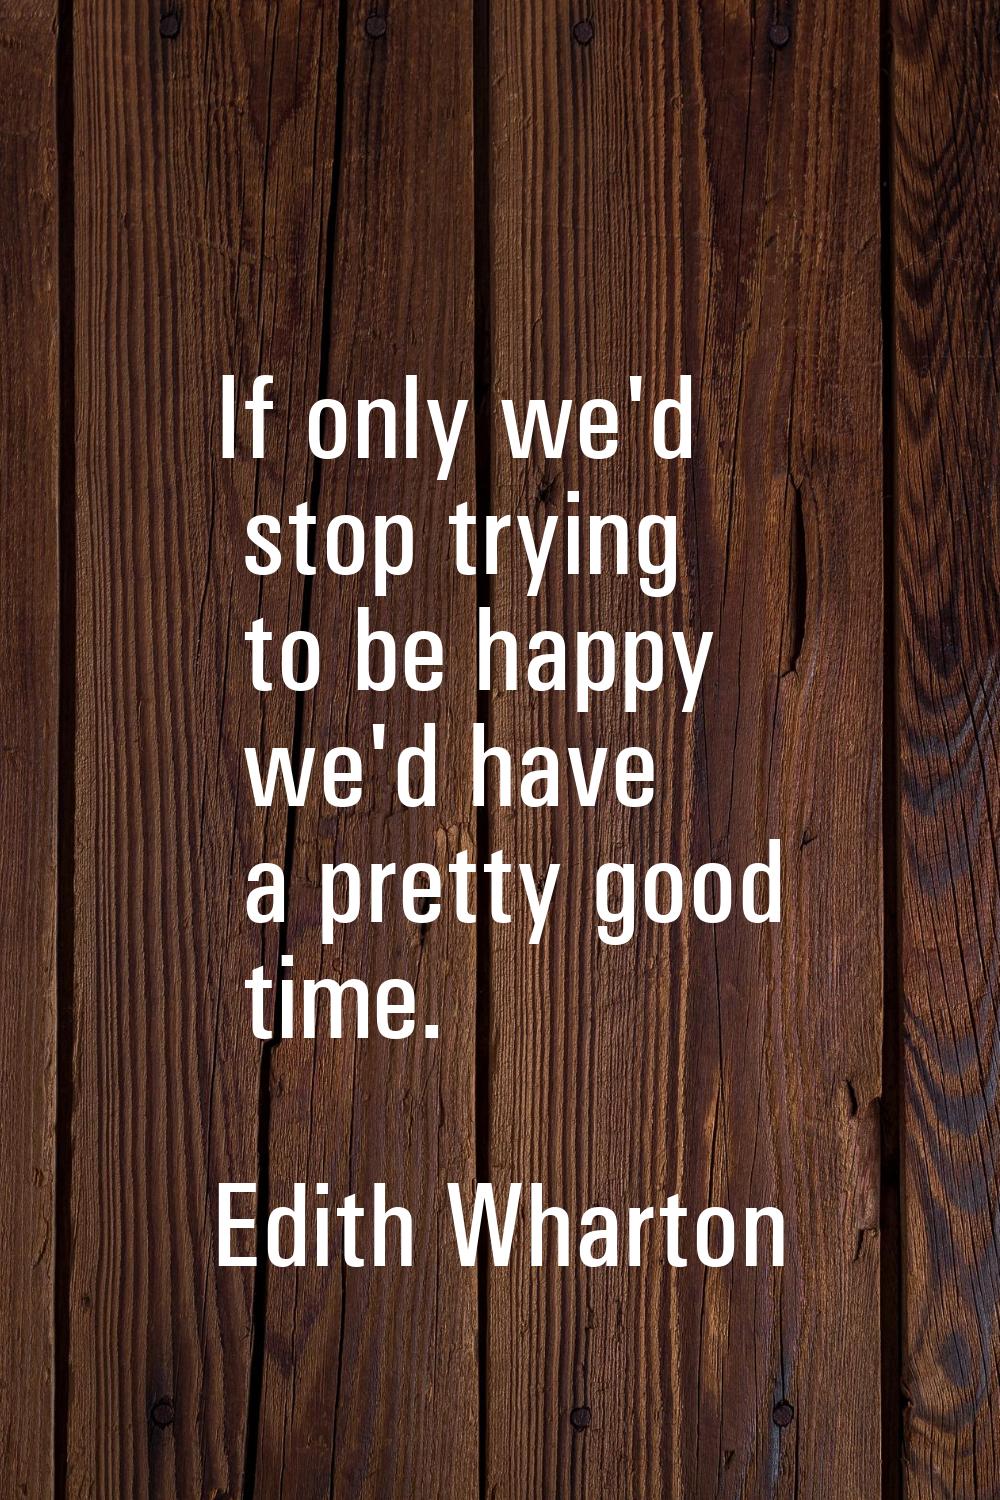 If only we'd stop trying to be happy we'd have a pretty good time.